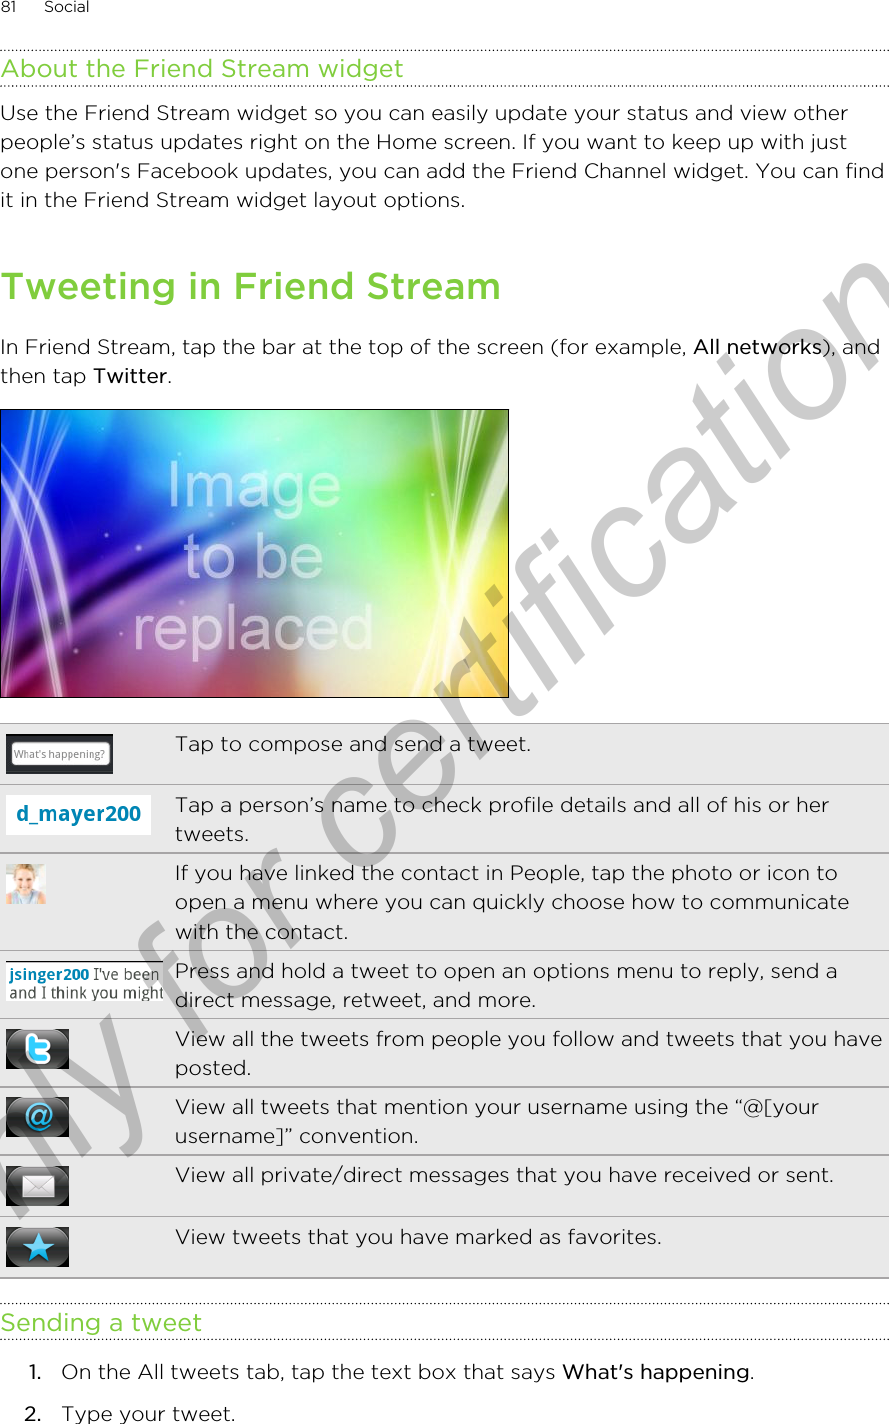 About the Friend Stream widgetUse the Friend Stream widget so you can easily update your status and view otherpeople’s status updates right on the Home screen. If you want to keep up with justone person&apos;s Facebook updates, you can add the Friend Channel widget. You can findit in the Friend Stream widget layout options.Tweeting in Friend StreamIn Friend Stream, tap the bar at the top of the screen (for example, All networks), andthen tap Twitter.Tap to compose and send a tweet.Tap a person’s name to check profile details and all of his or hertweets.If you have linked the contact in People, tap the photo or icon toopen a menu where you can quickly choose how to communicatewith the contact.Press and hold a tweet to open an options menu to reply, send adirect message, retweet, and more.View all the tweets from people you follow and tweets that you haveposted.View all tweets that mention your username using the “@[yourusername]” convention.View all private/direct messages that you have received or sent.View tweets that you have marked as favorites.Sending a tweet1. On the All tweets tab, tap the text box that says What&apos;s happening.2. Type your tweet.81 SocialOnly for certification